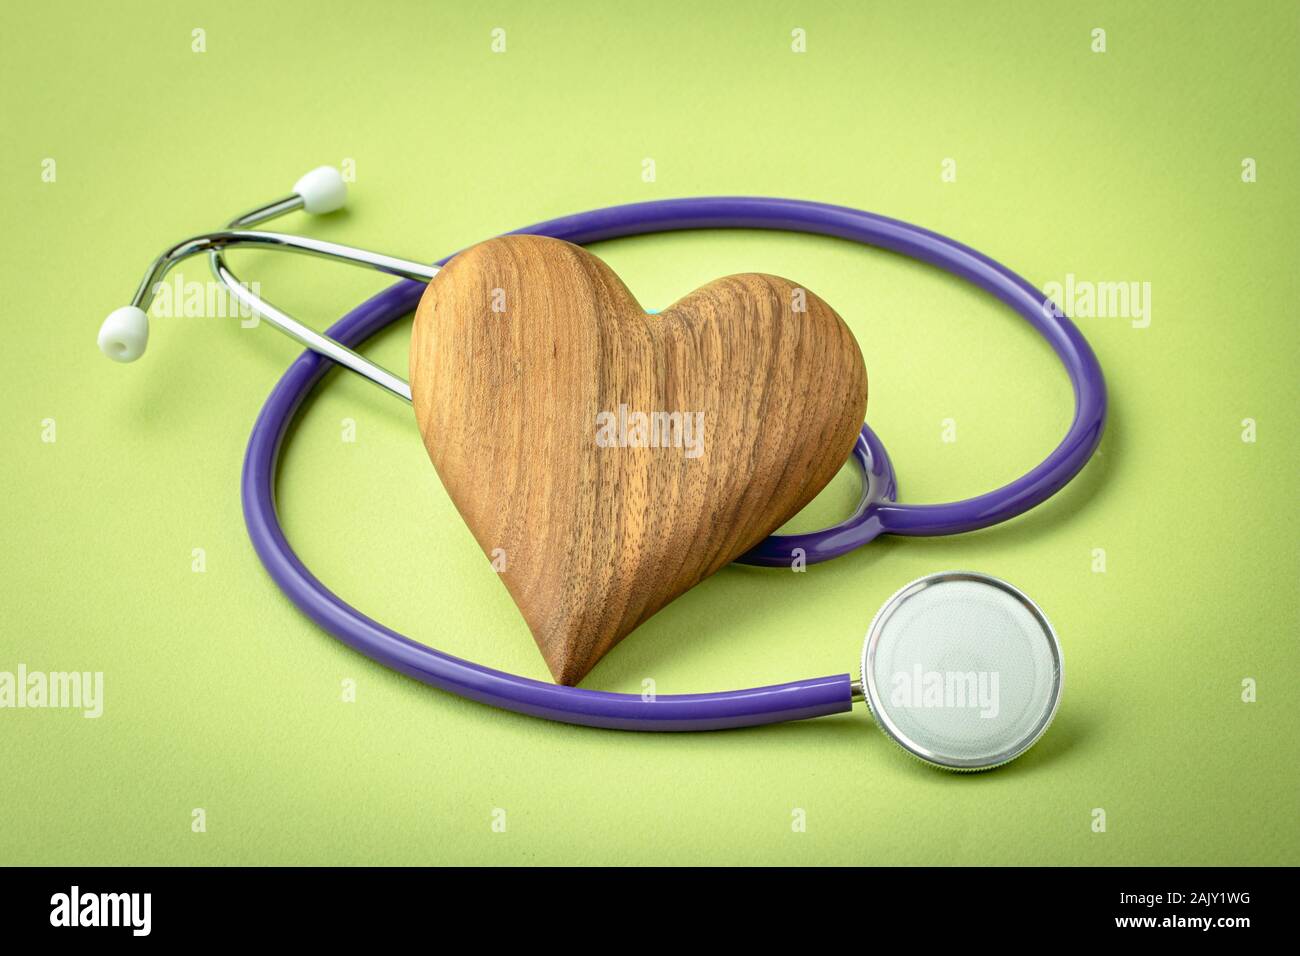 Wooden heart with stethoscope Stock Photo